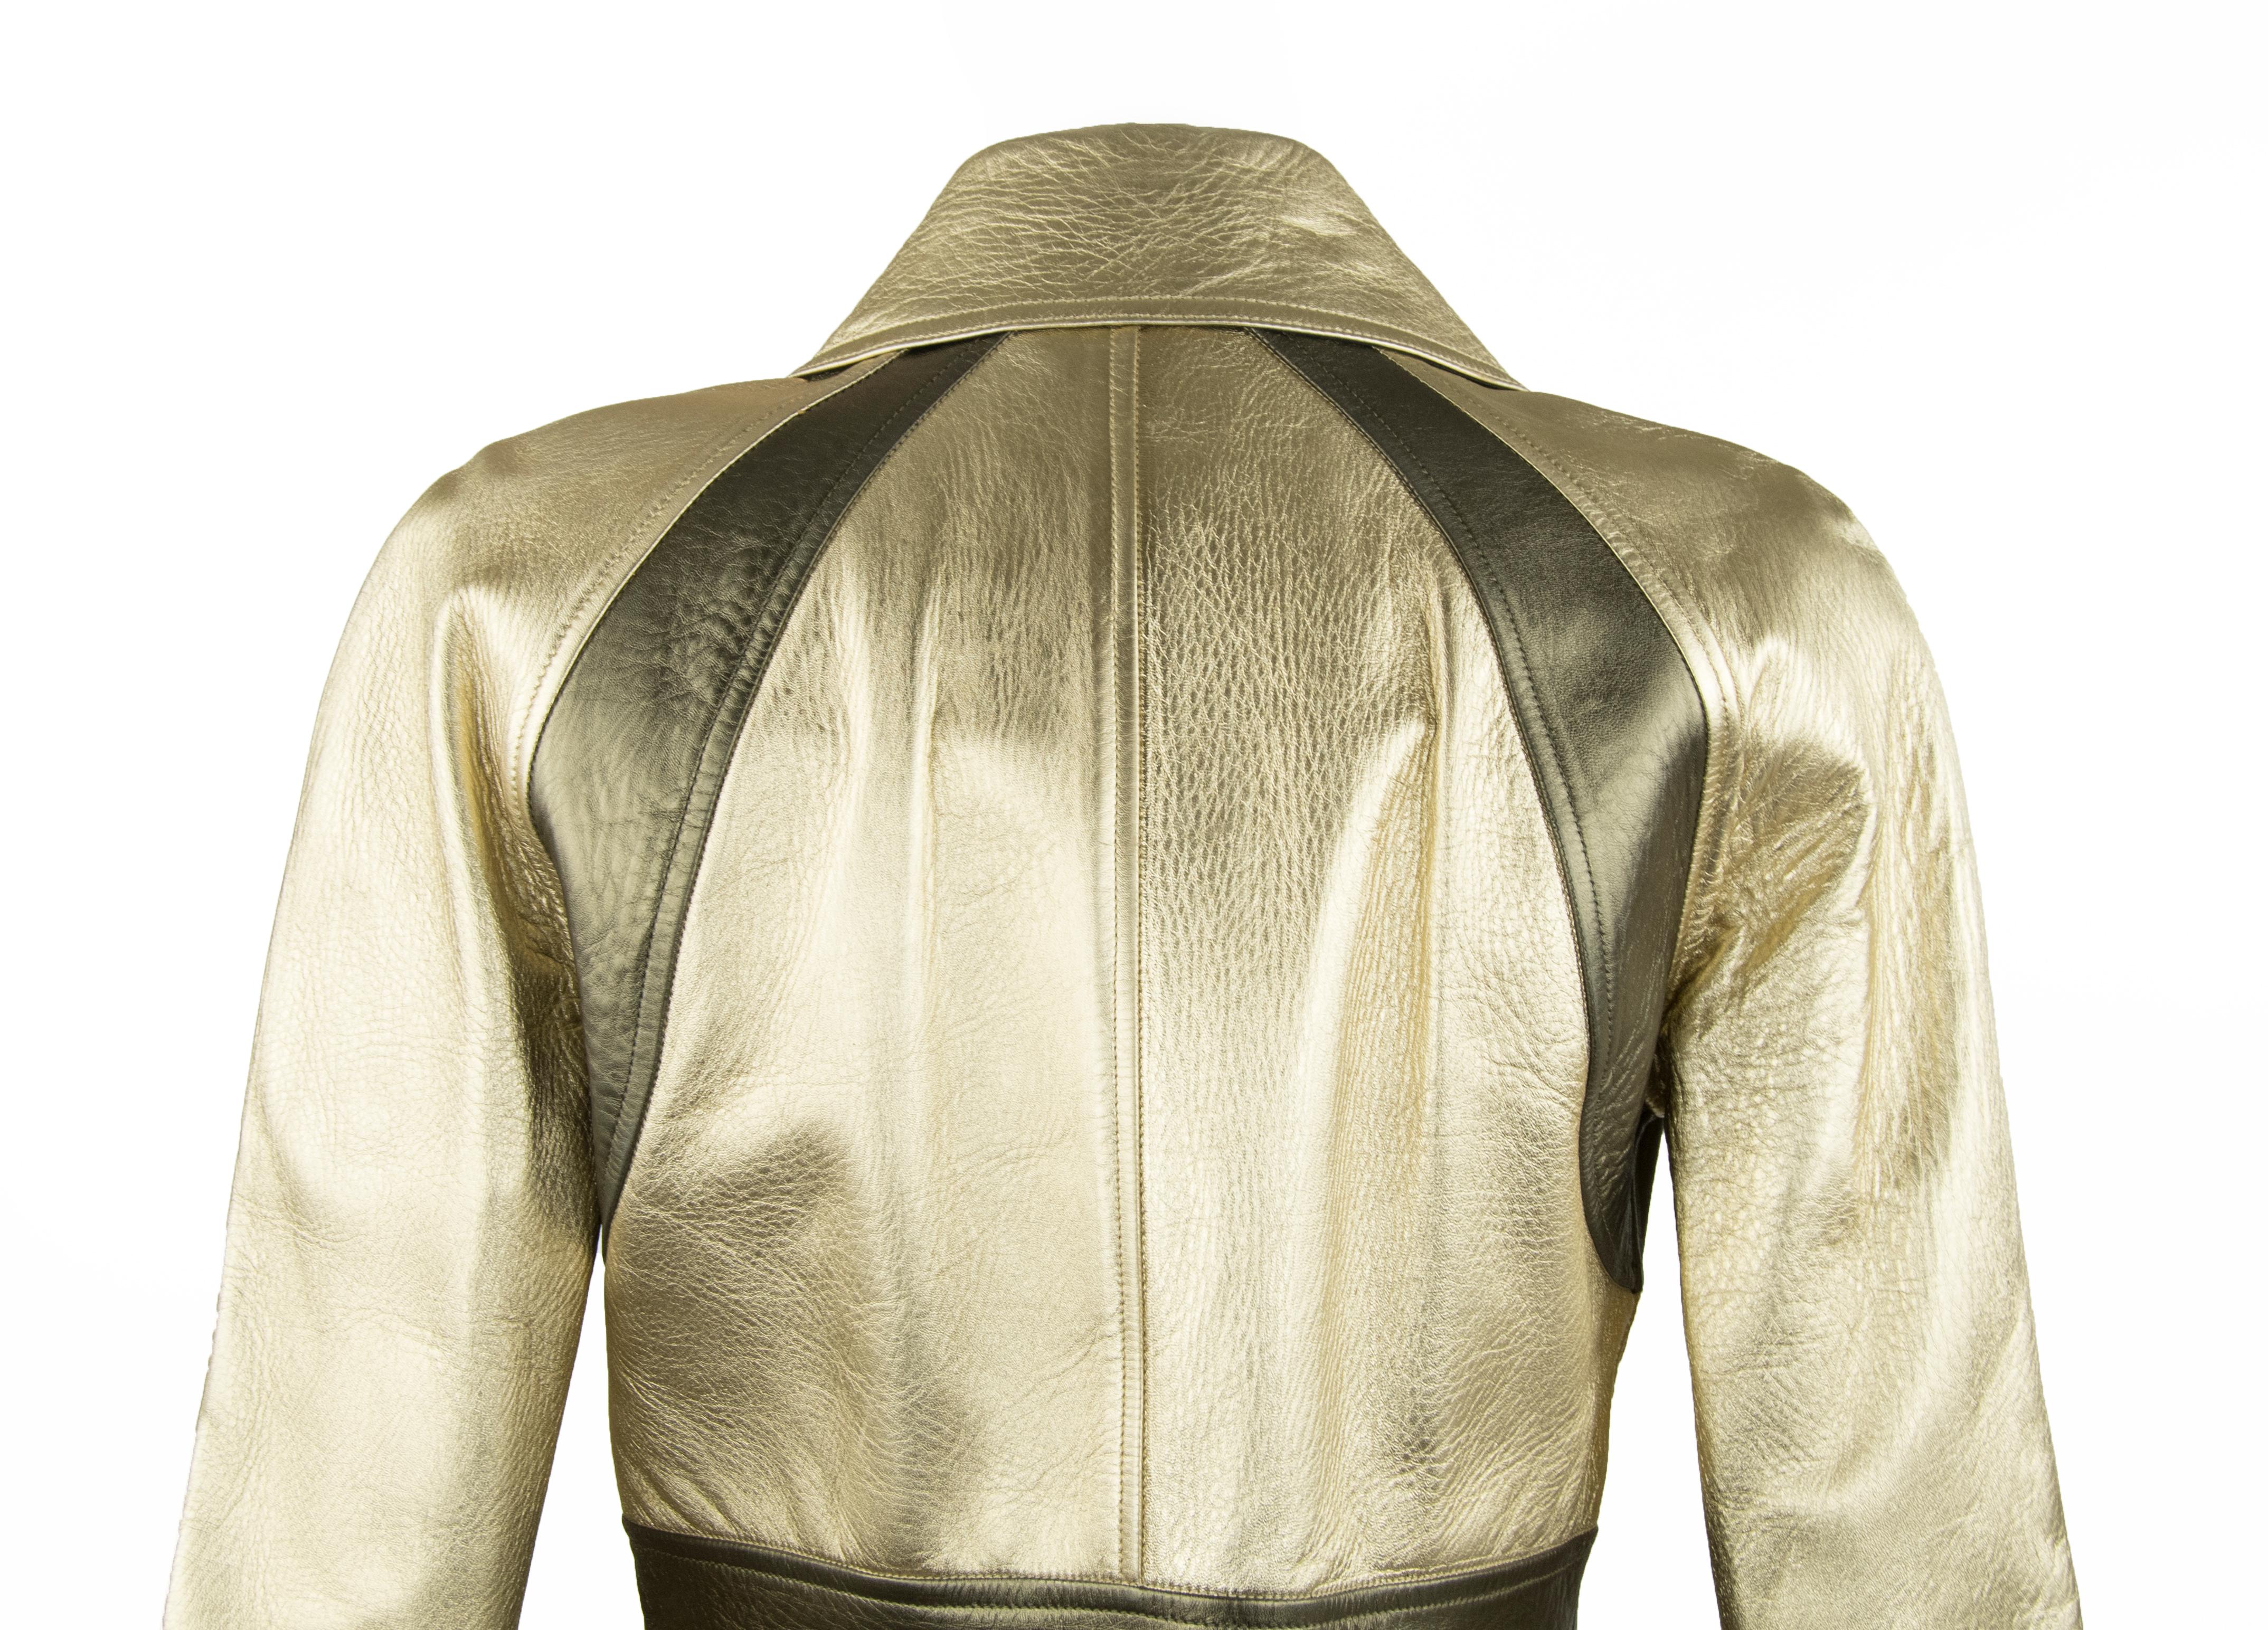 Gucci by Tom Ford Gold Leather jacket  In Excellent Condition For Sale In Newport, RI